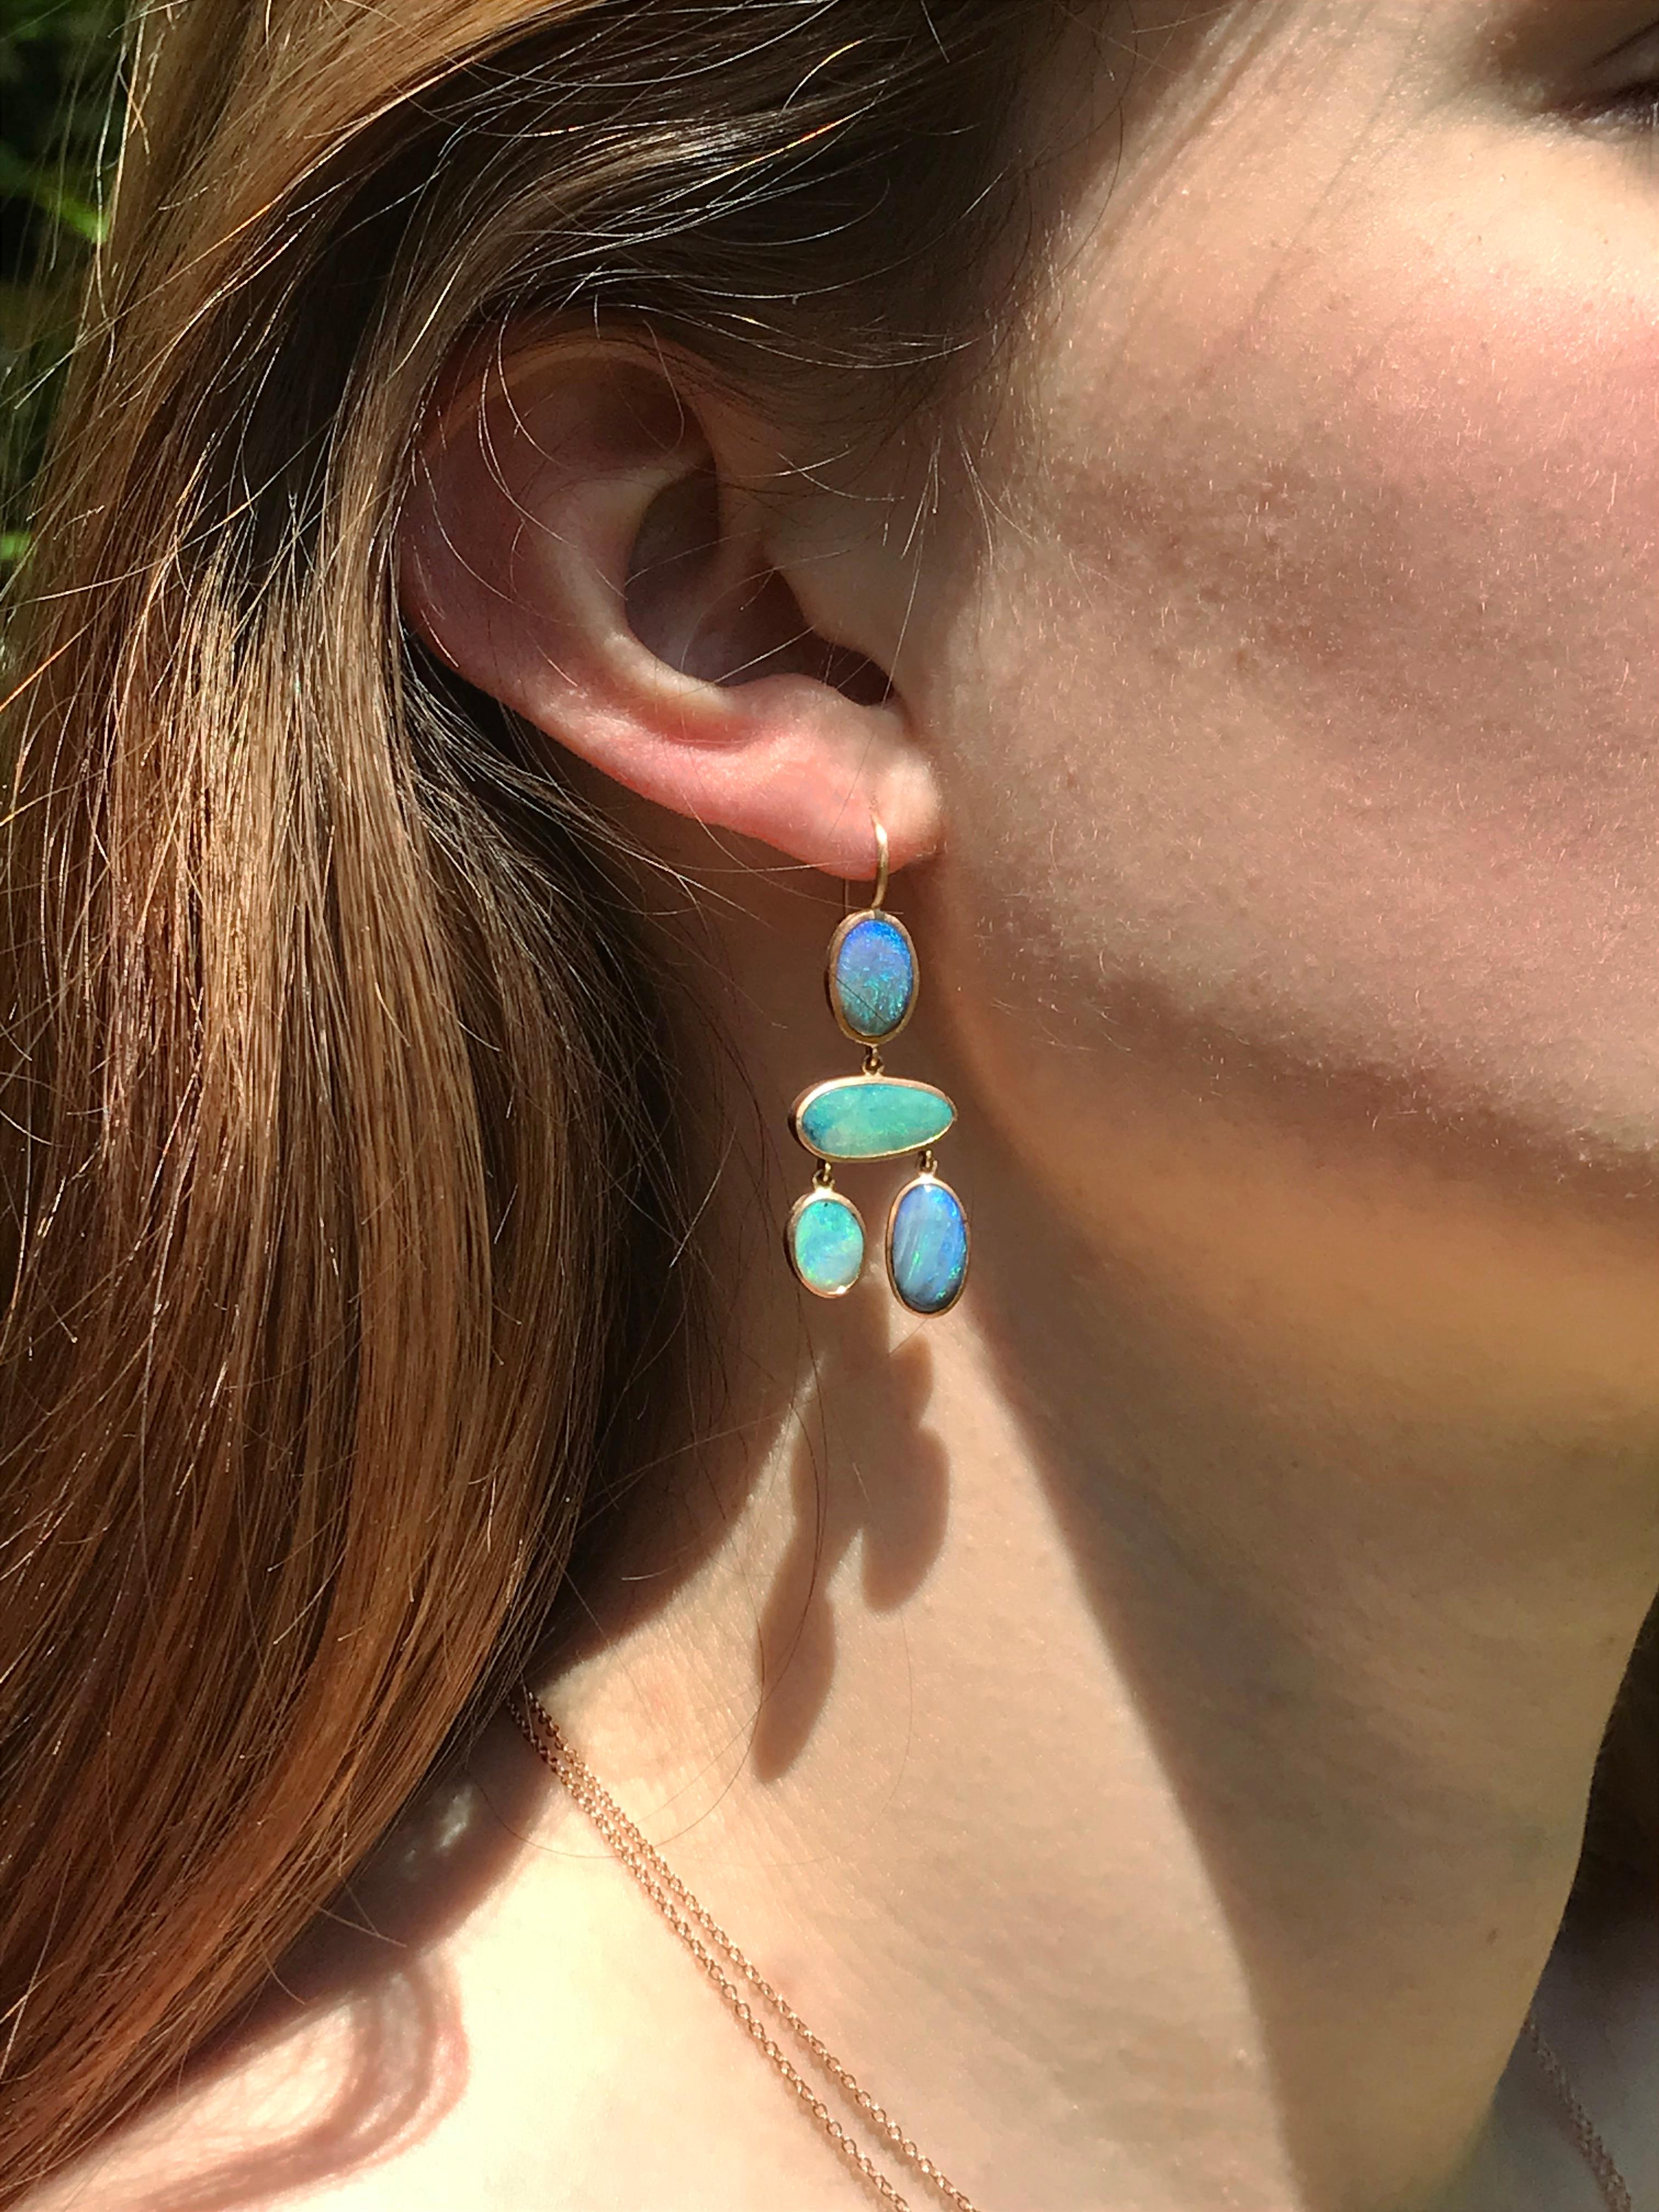 Dalben design One of a kind 18k rose gold matte finishing dangle earrings with 8 light blue bezel set Australian Boulder Opals weighing 12 carats.  
max width 16 mm 
height without leverback 34 mm
height with leverback 42 mm  
The earrings has been